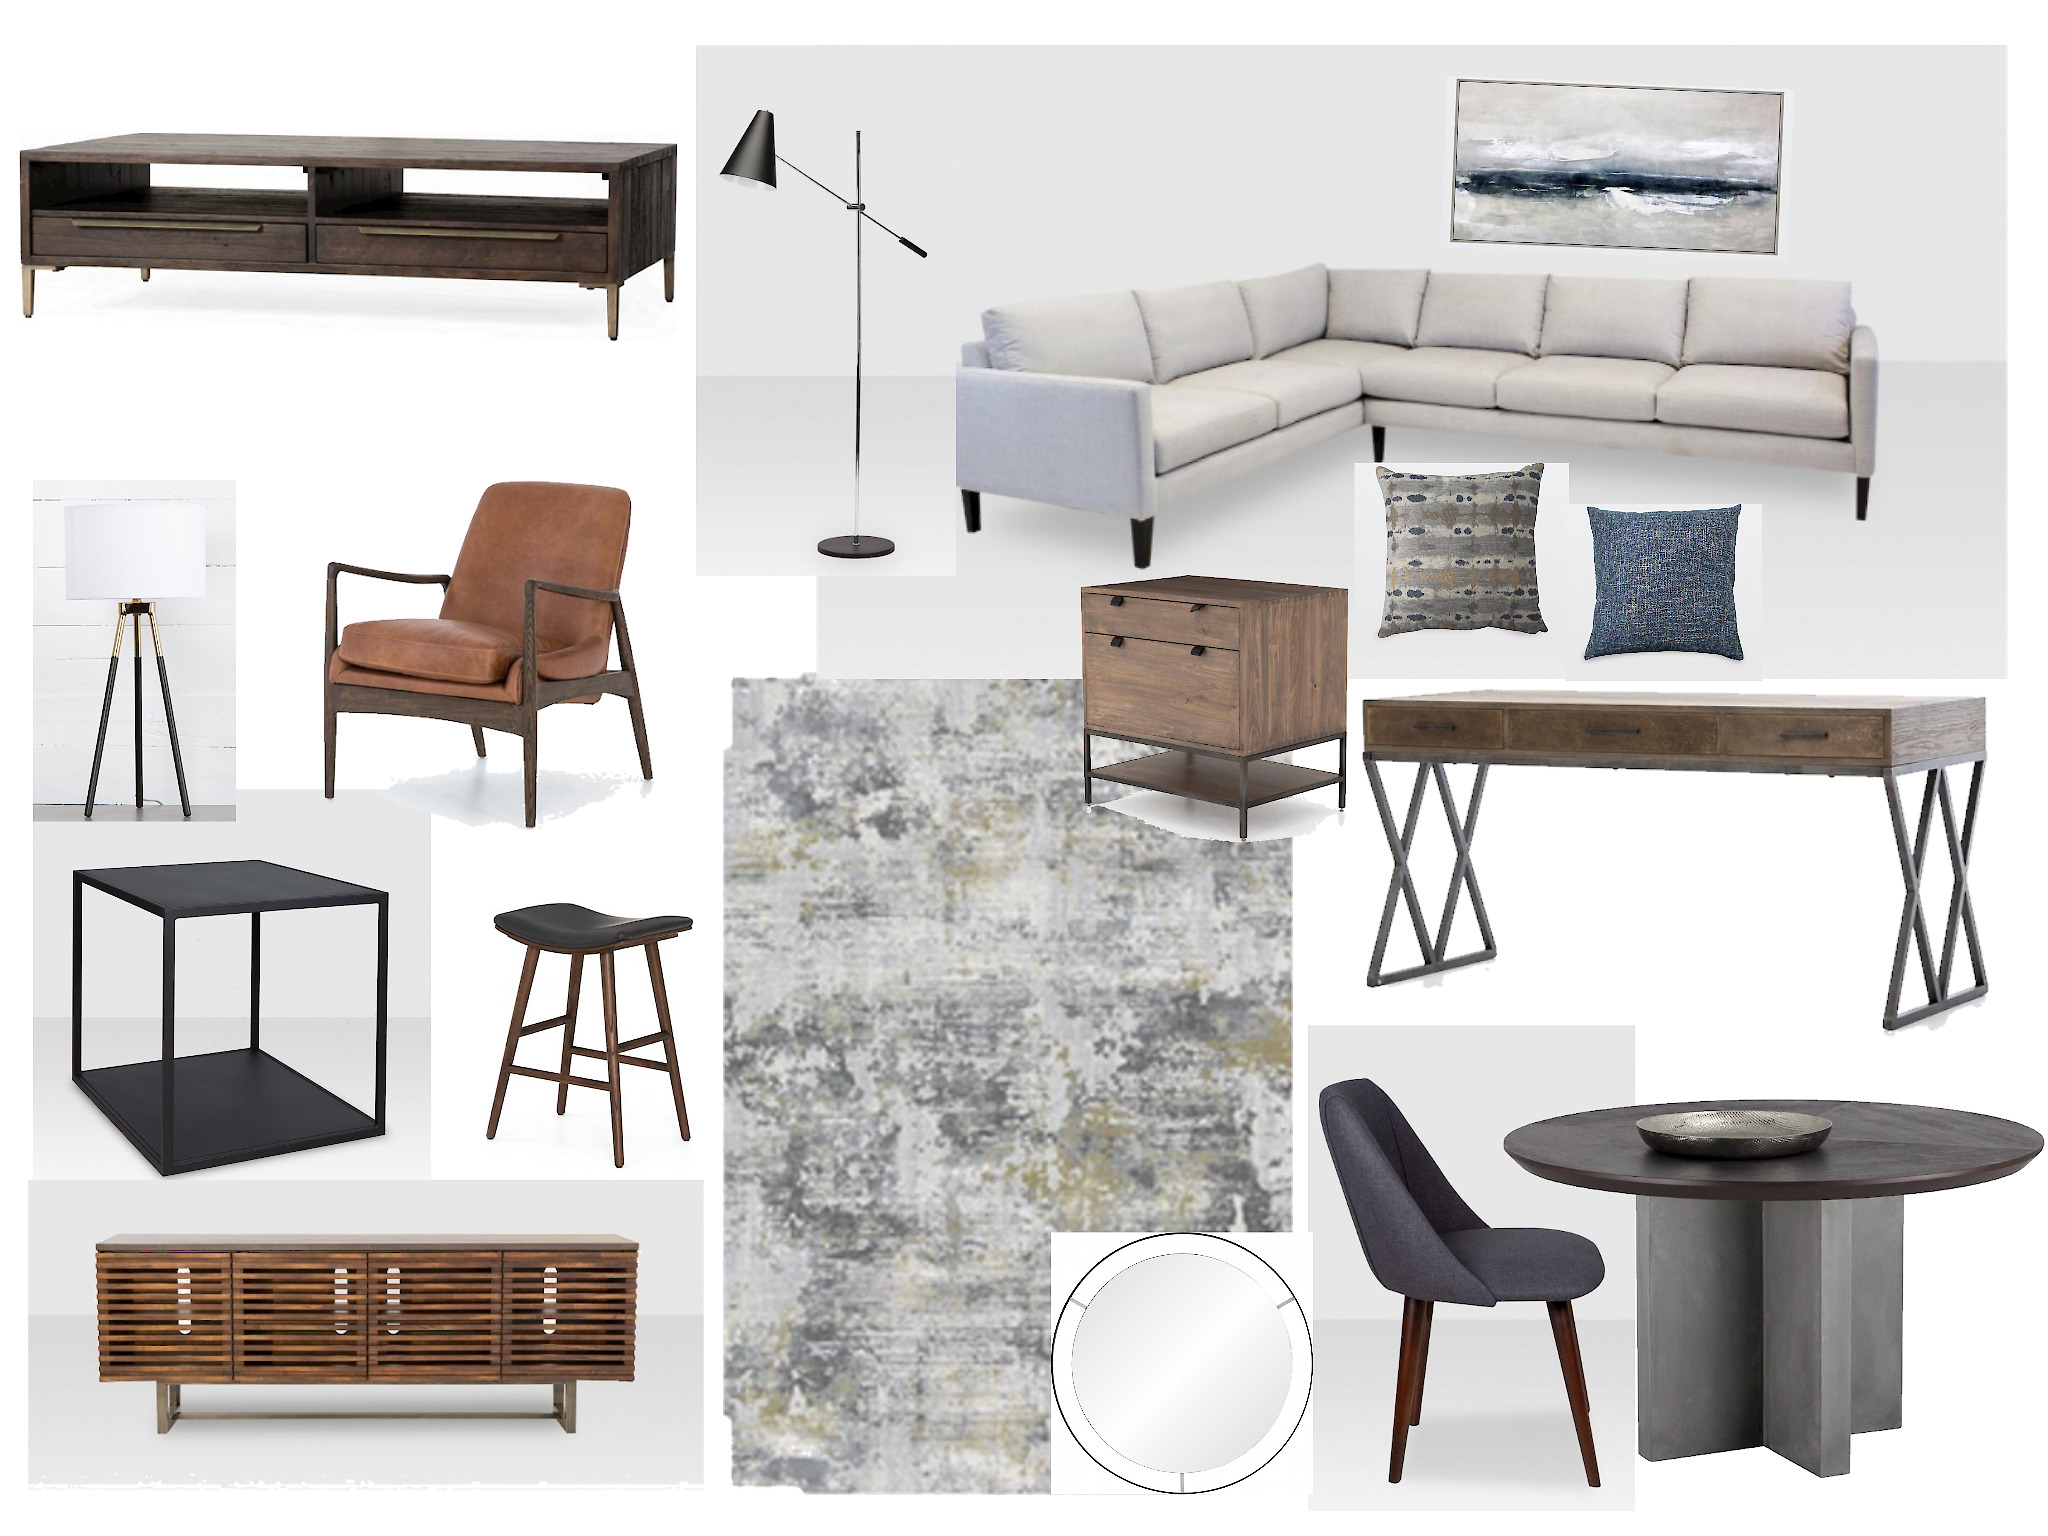 Mood board for a rustic family room